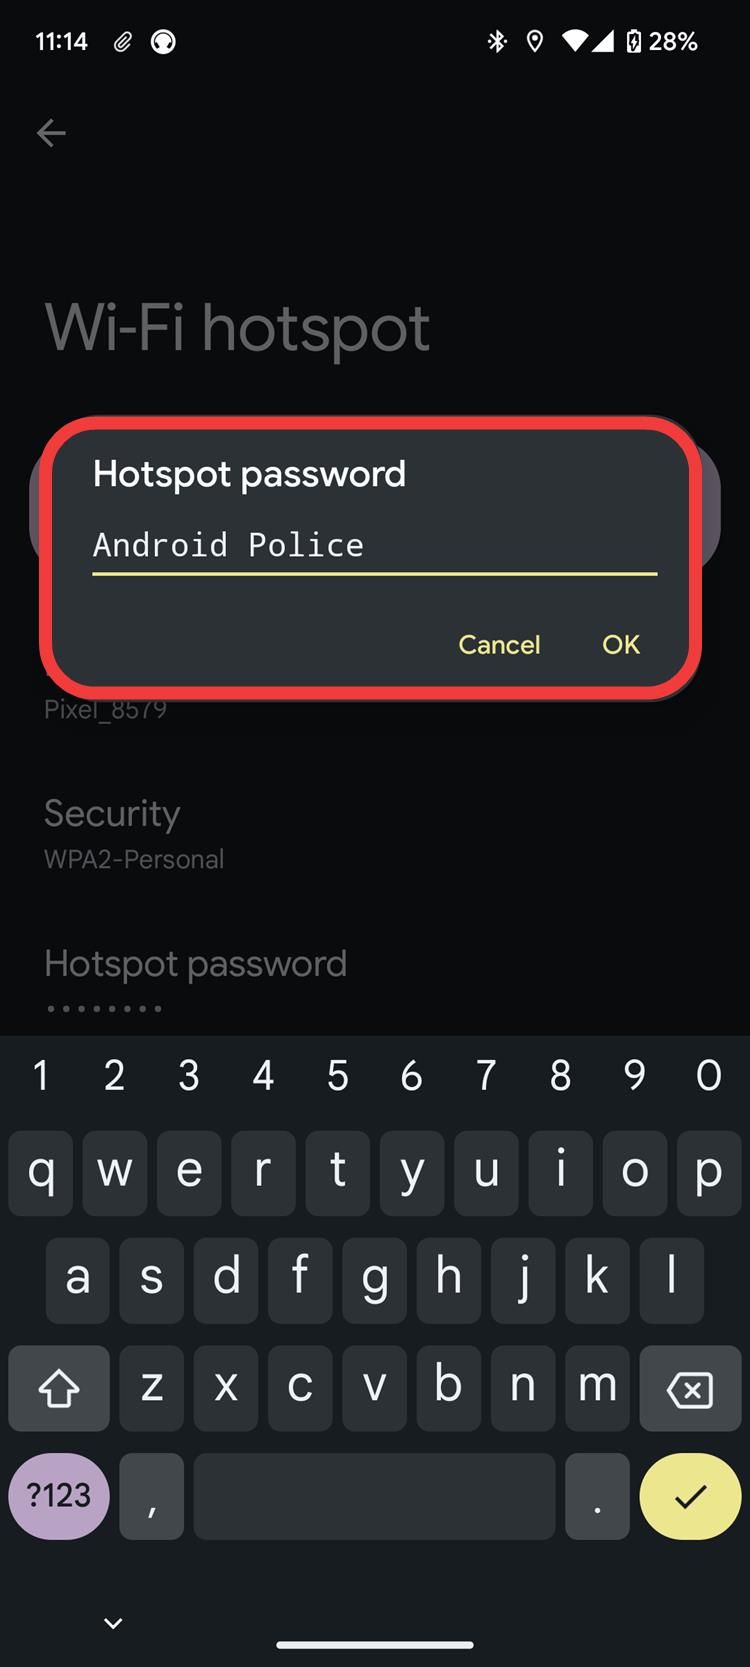 A screenshot of Android settings showing hotspot password naming.